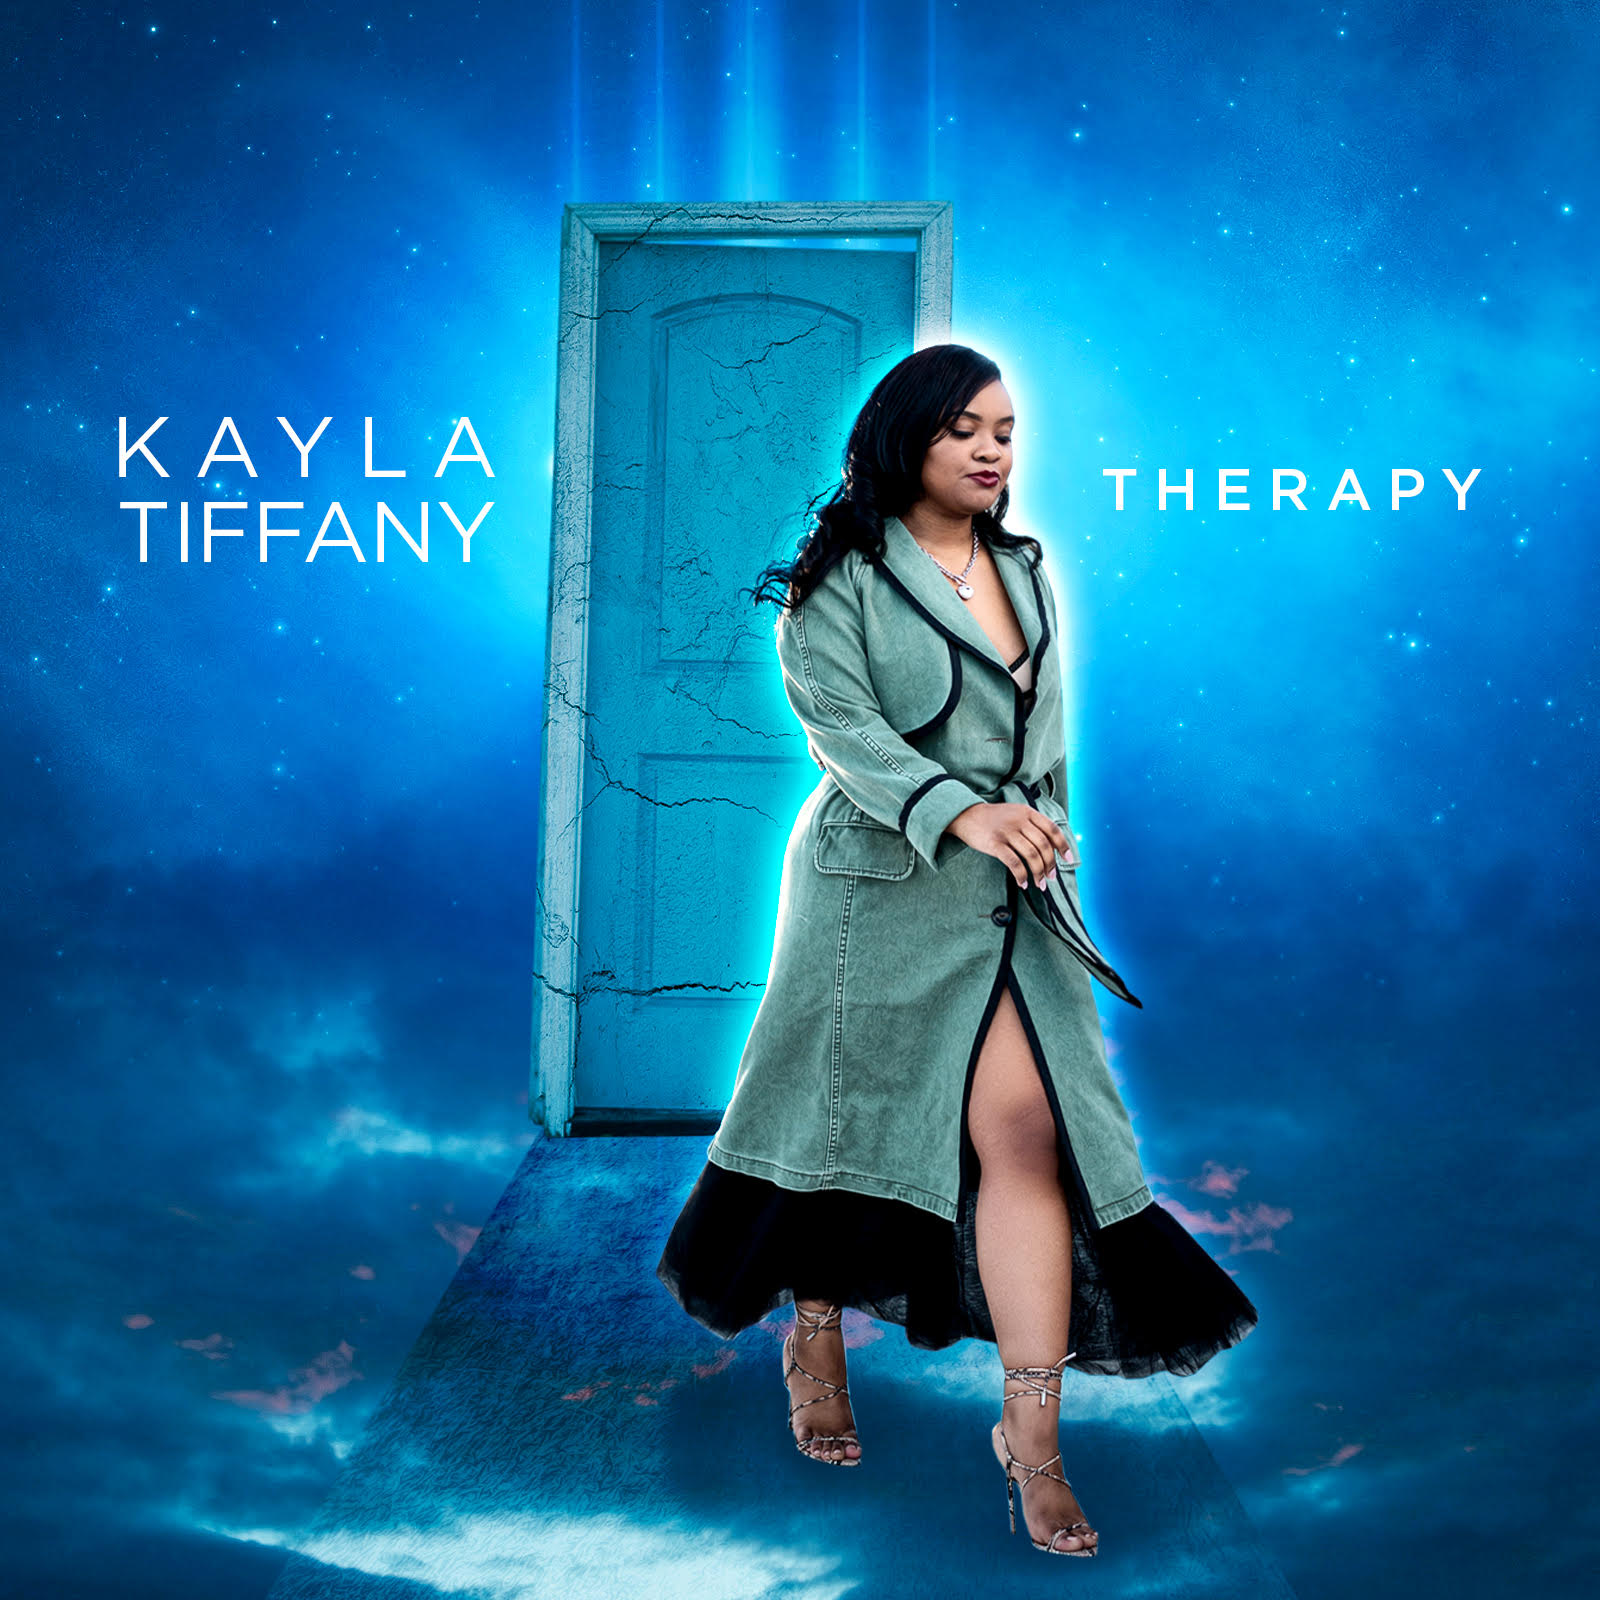 JoJo Hailey’s Daughter Kayla Tiffany Releases Debut Single “Therapy”